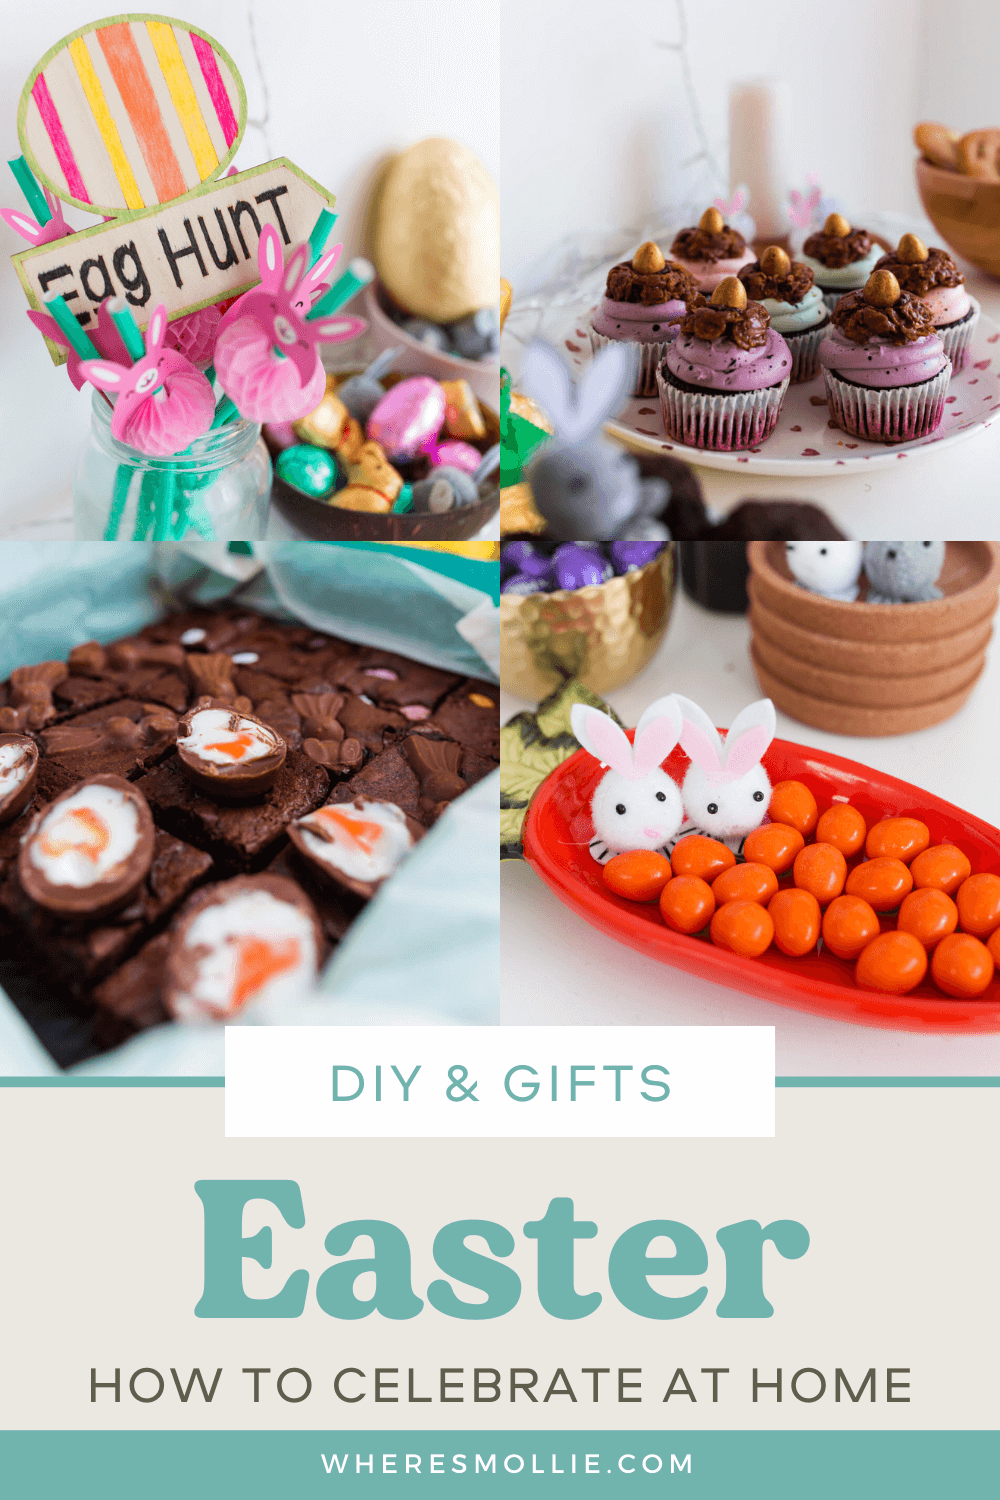 Easter party ideas: Hosting guests, crafts and baking